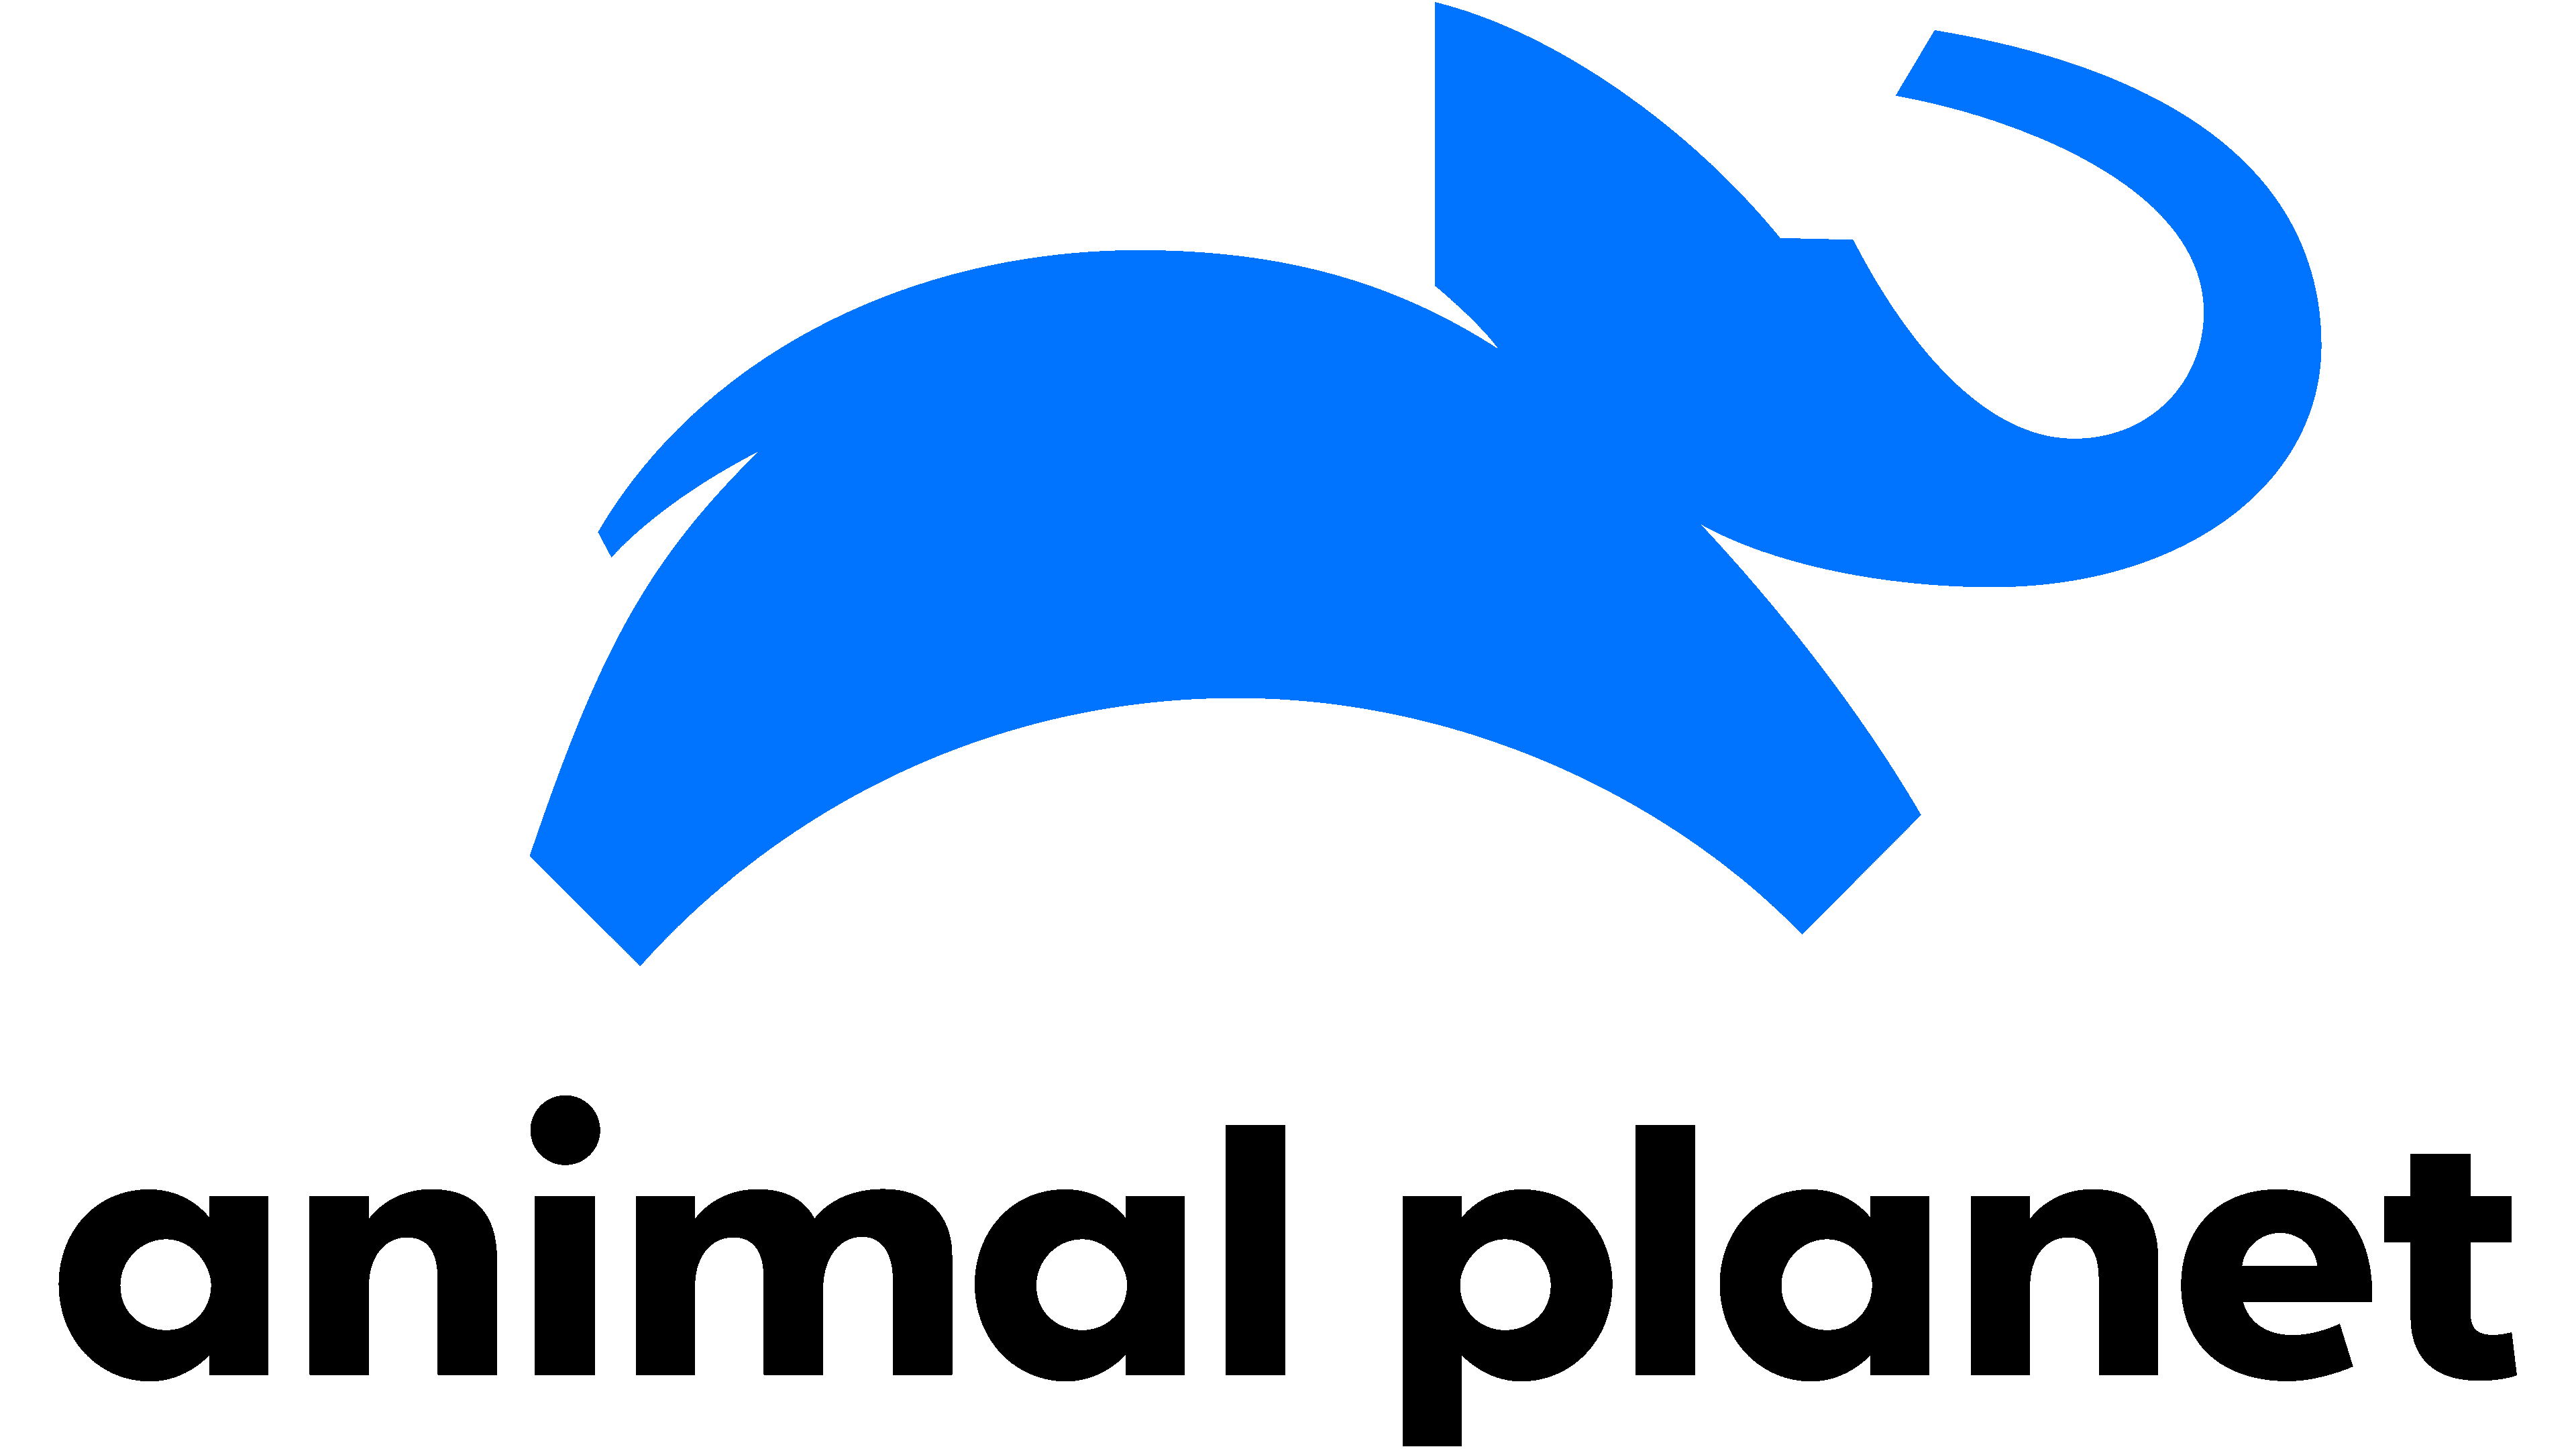 Animal Planet logo and symbol, meaning, history, PNG